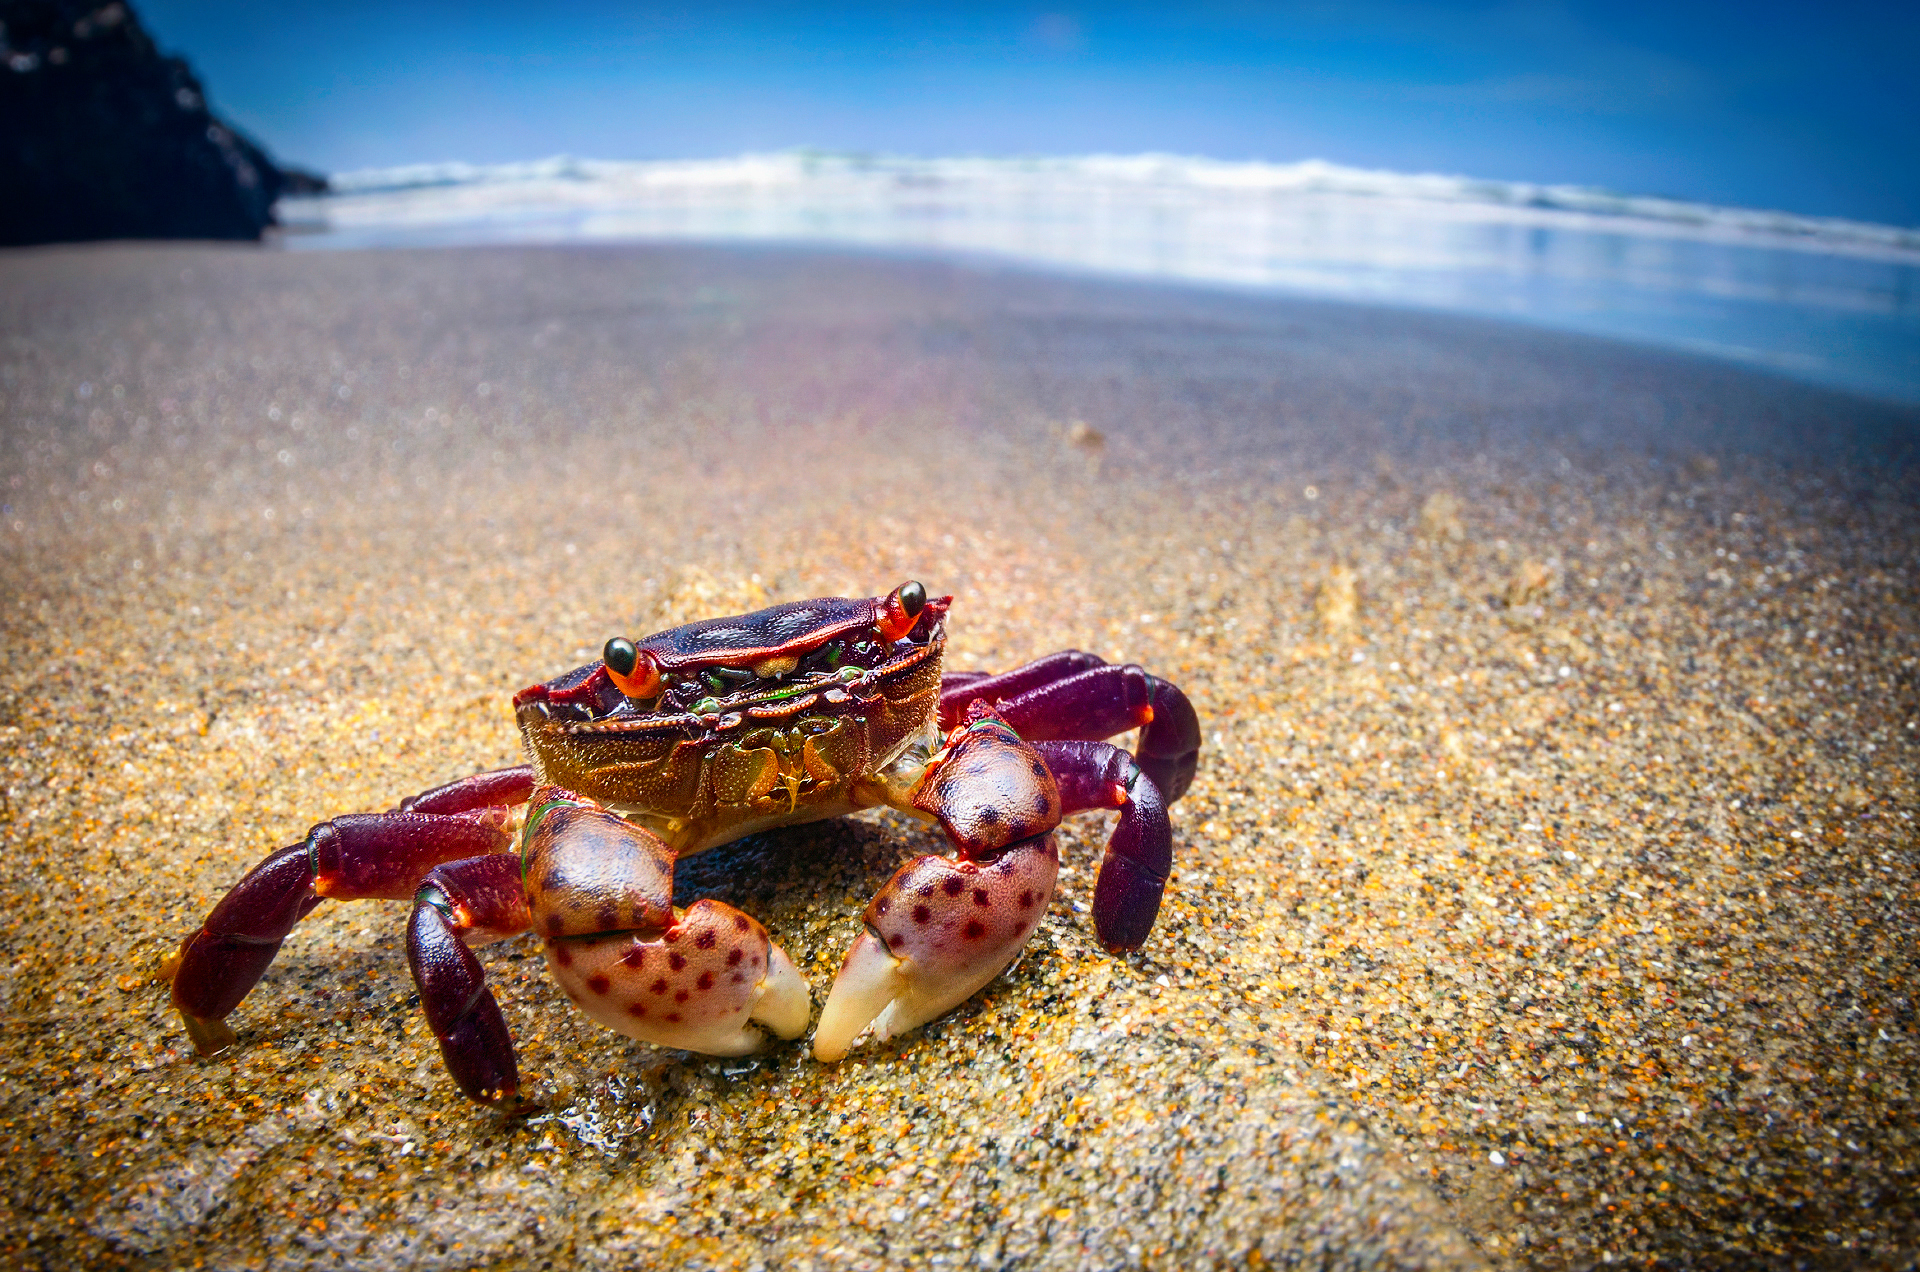 4k Crabs Wallpapers High Quality Download Free HD Wallpapers Download Free Images Wallpaper [wallpaper981.blogspot.com]